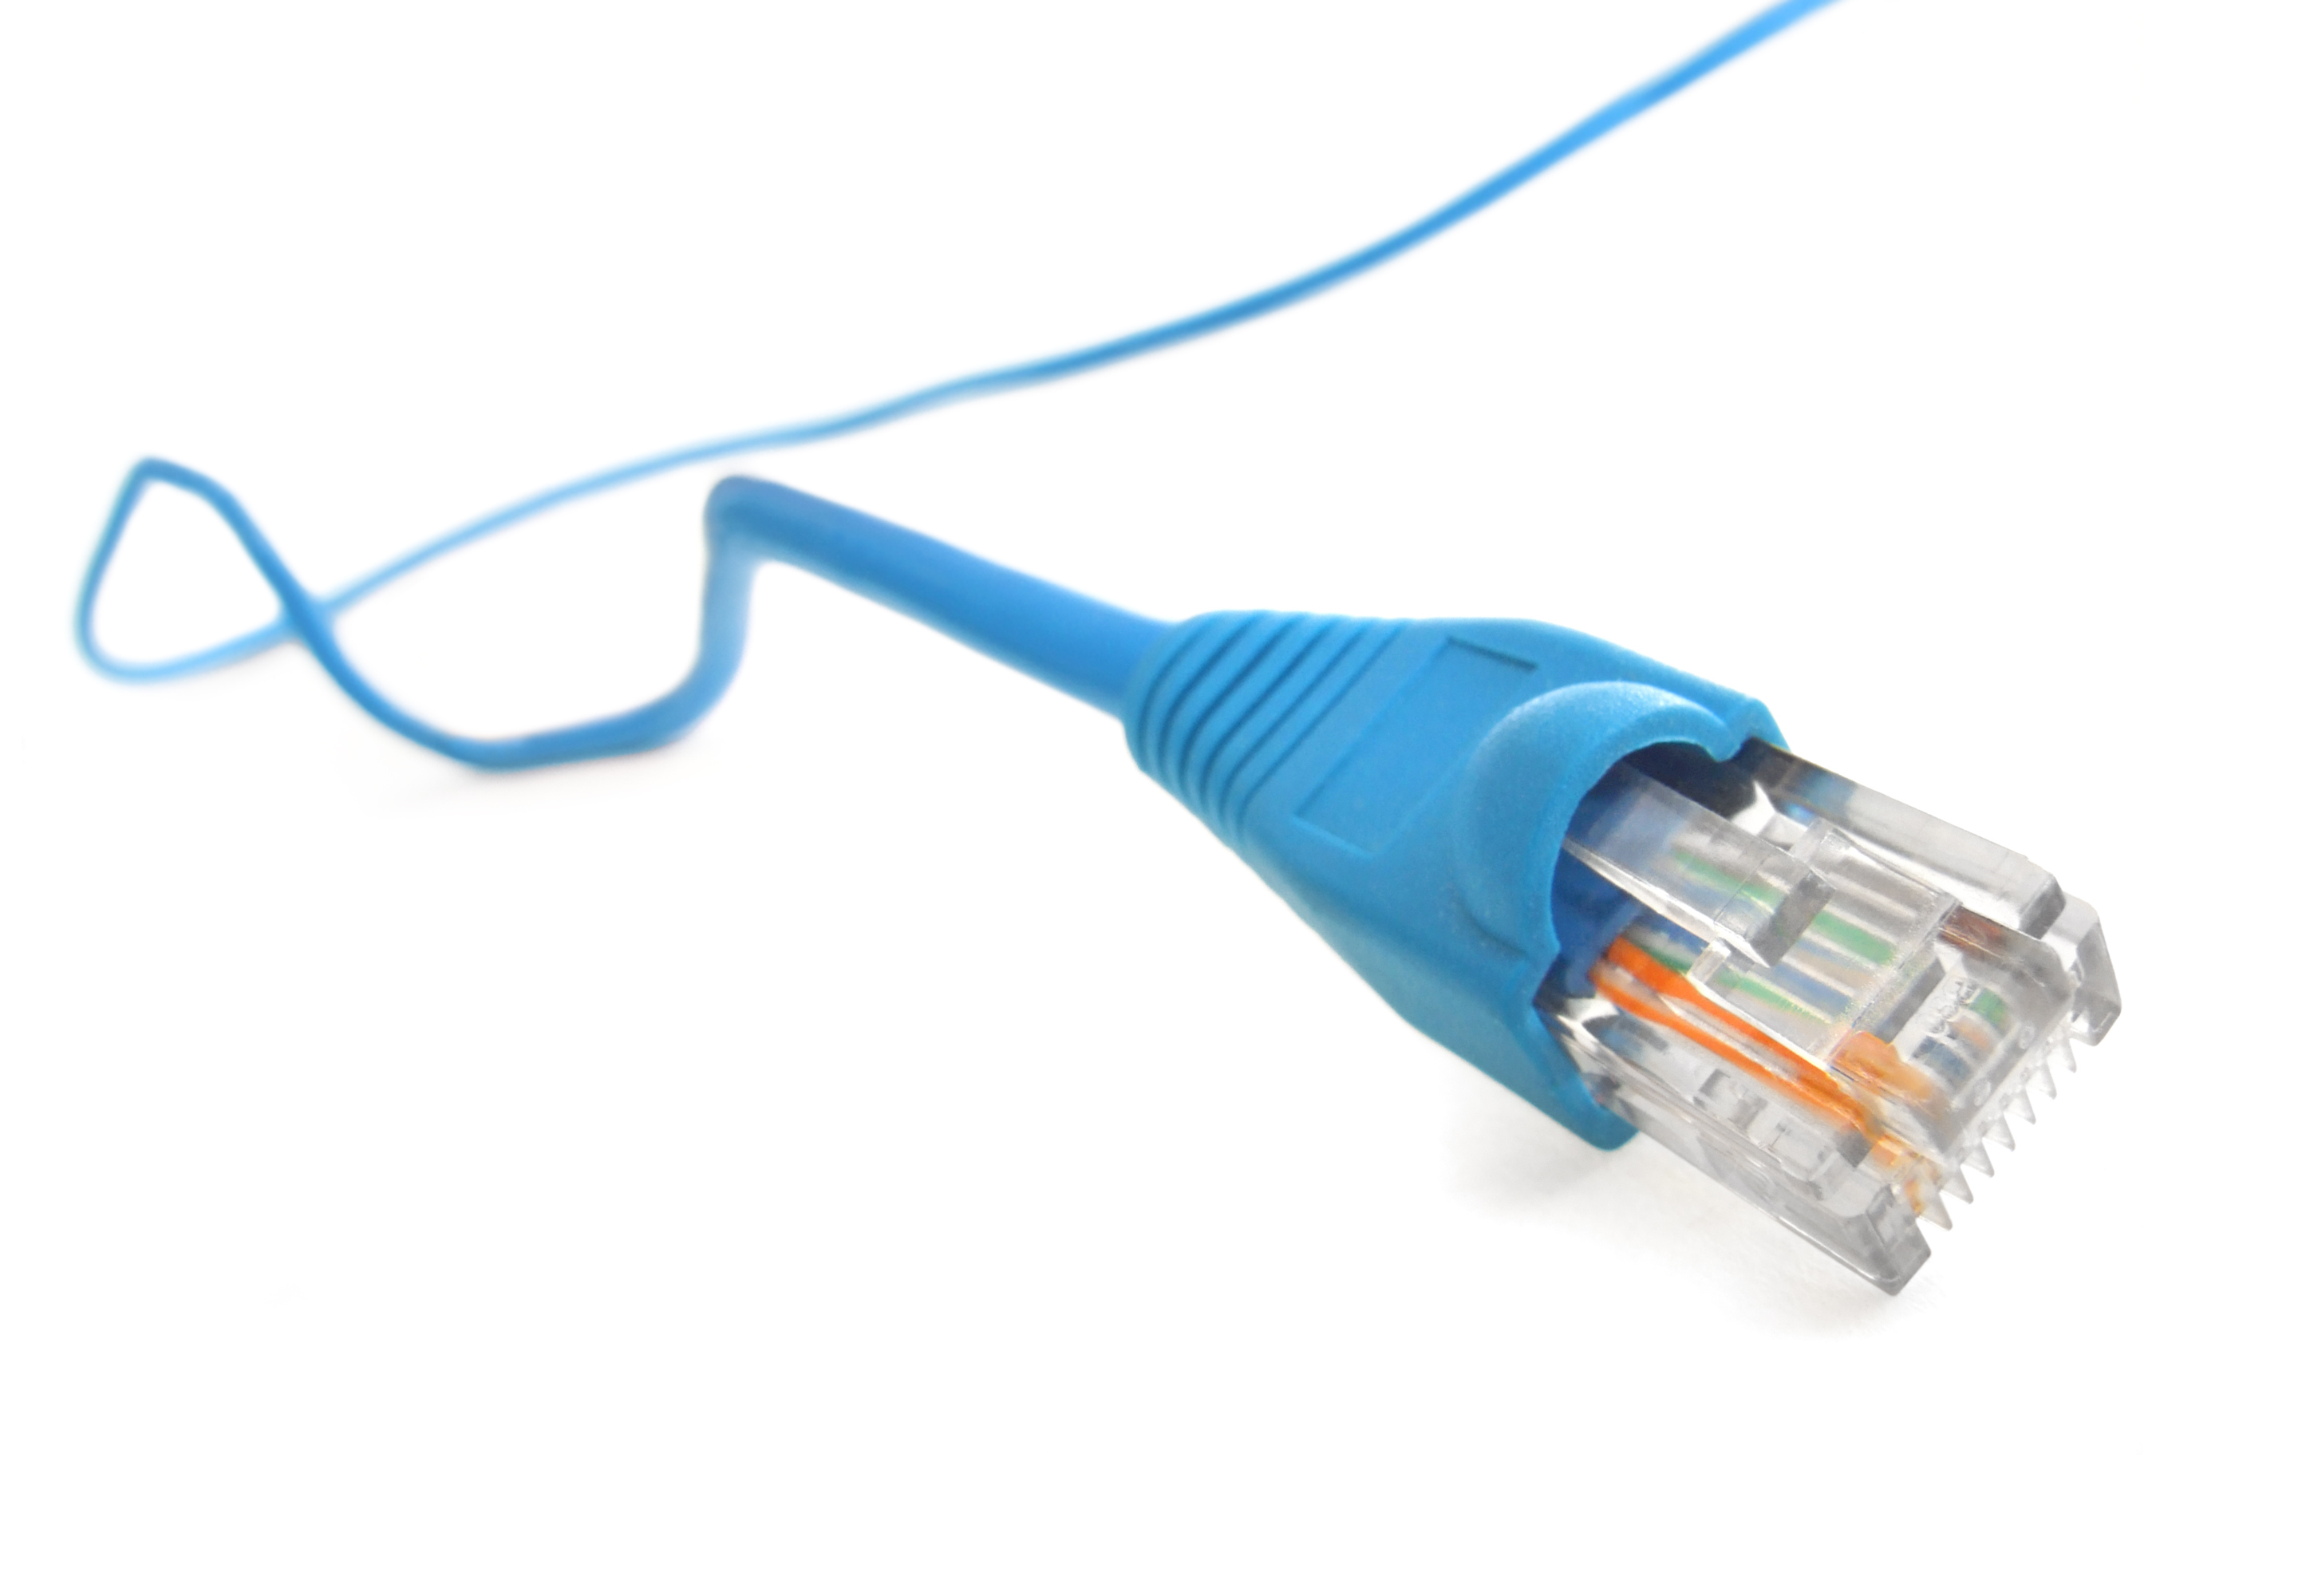 An Ethernet RJ45 cable.